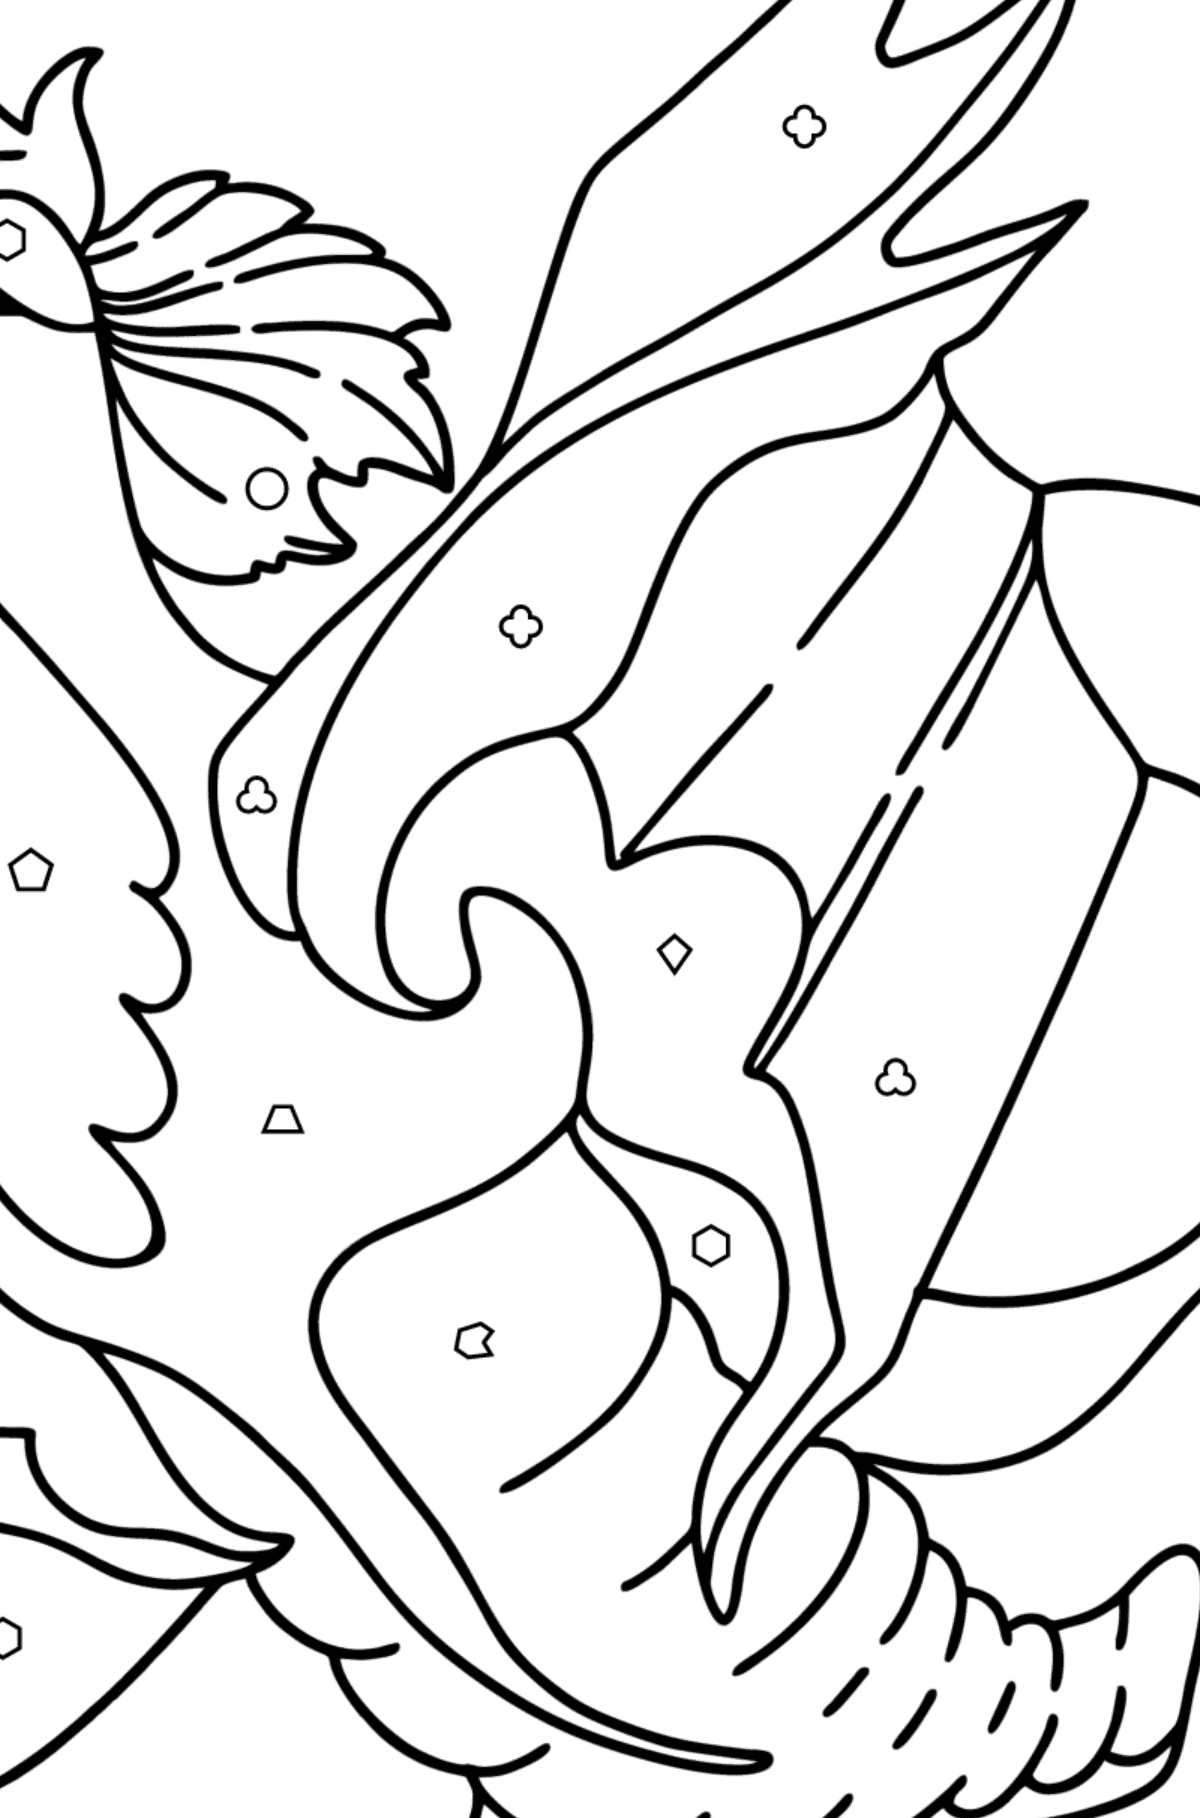 Lucky Dragon coloring page - Coloring by Geometric Shapes for Kids